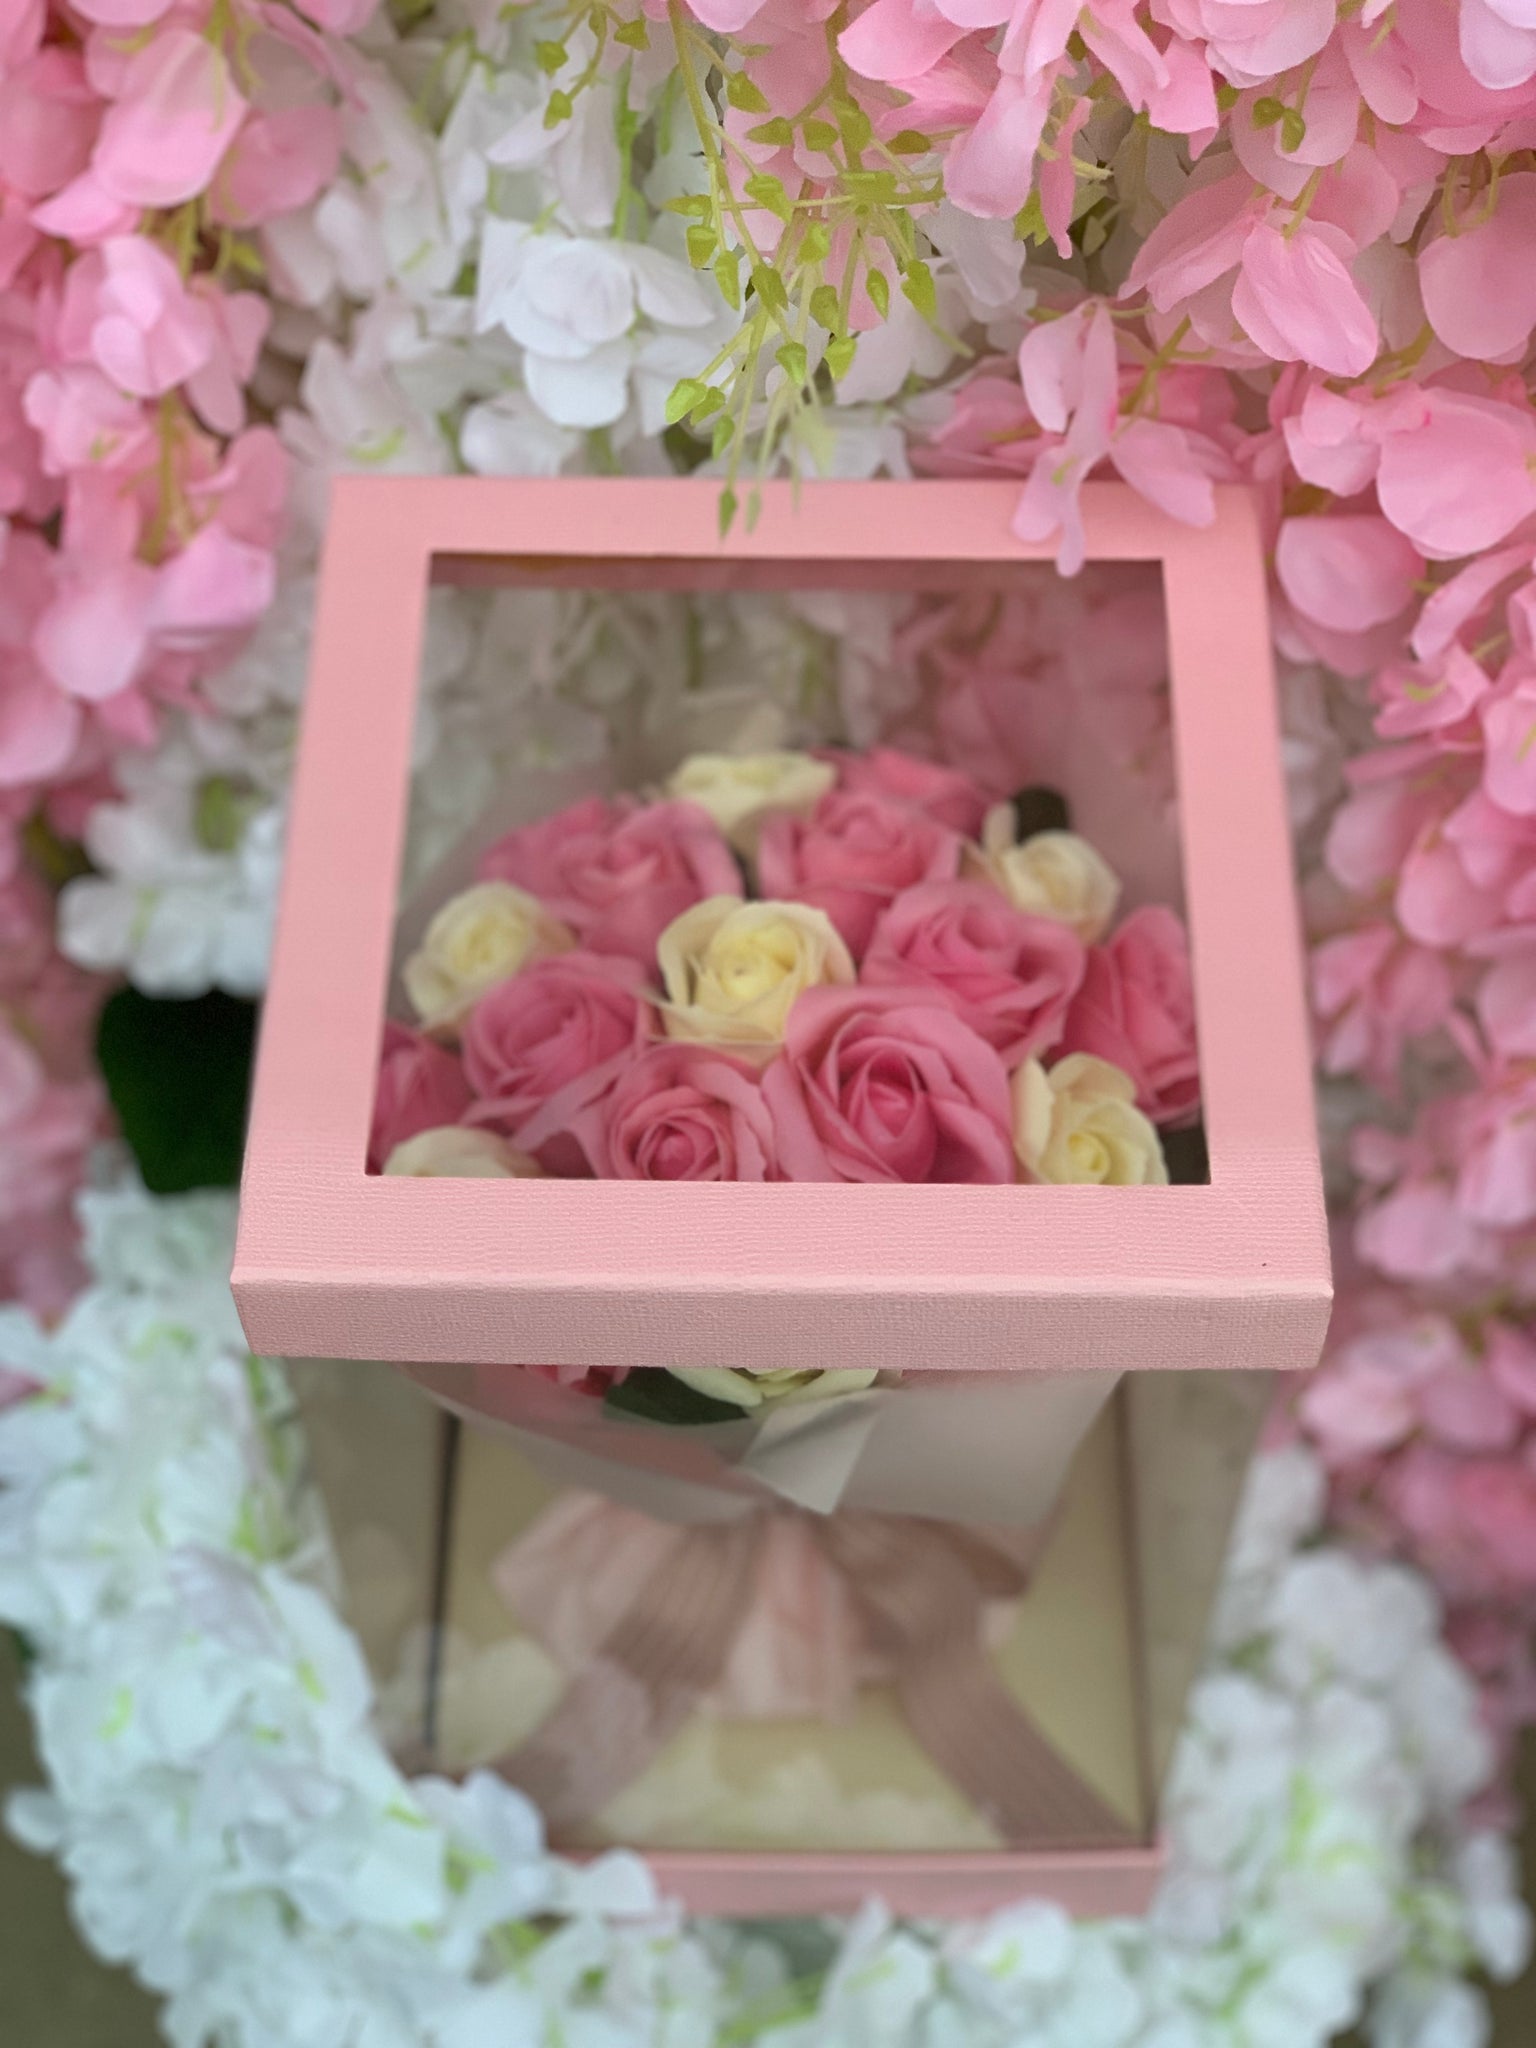 Large Pink Rose Bouquet In A Box